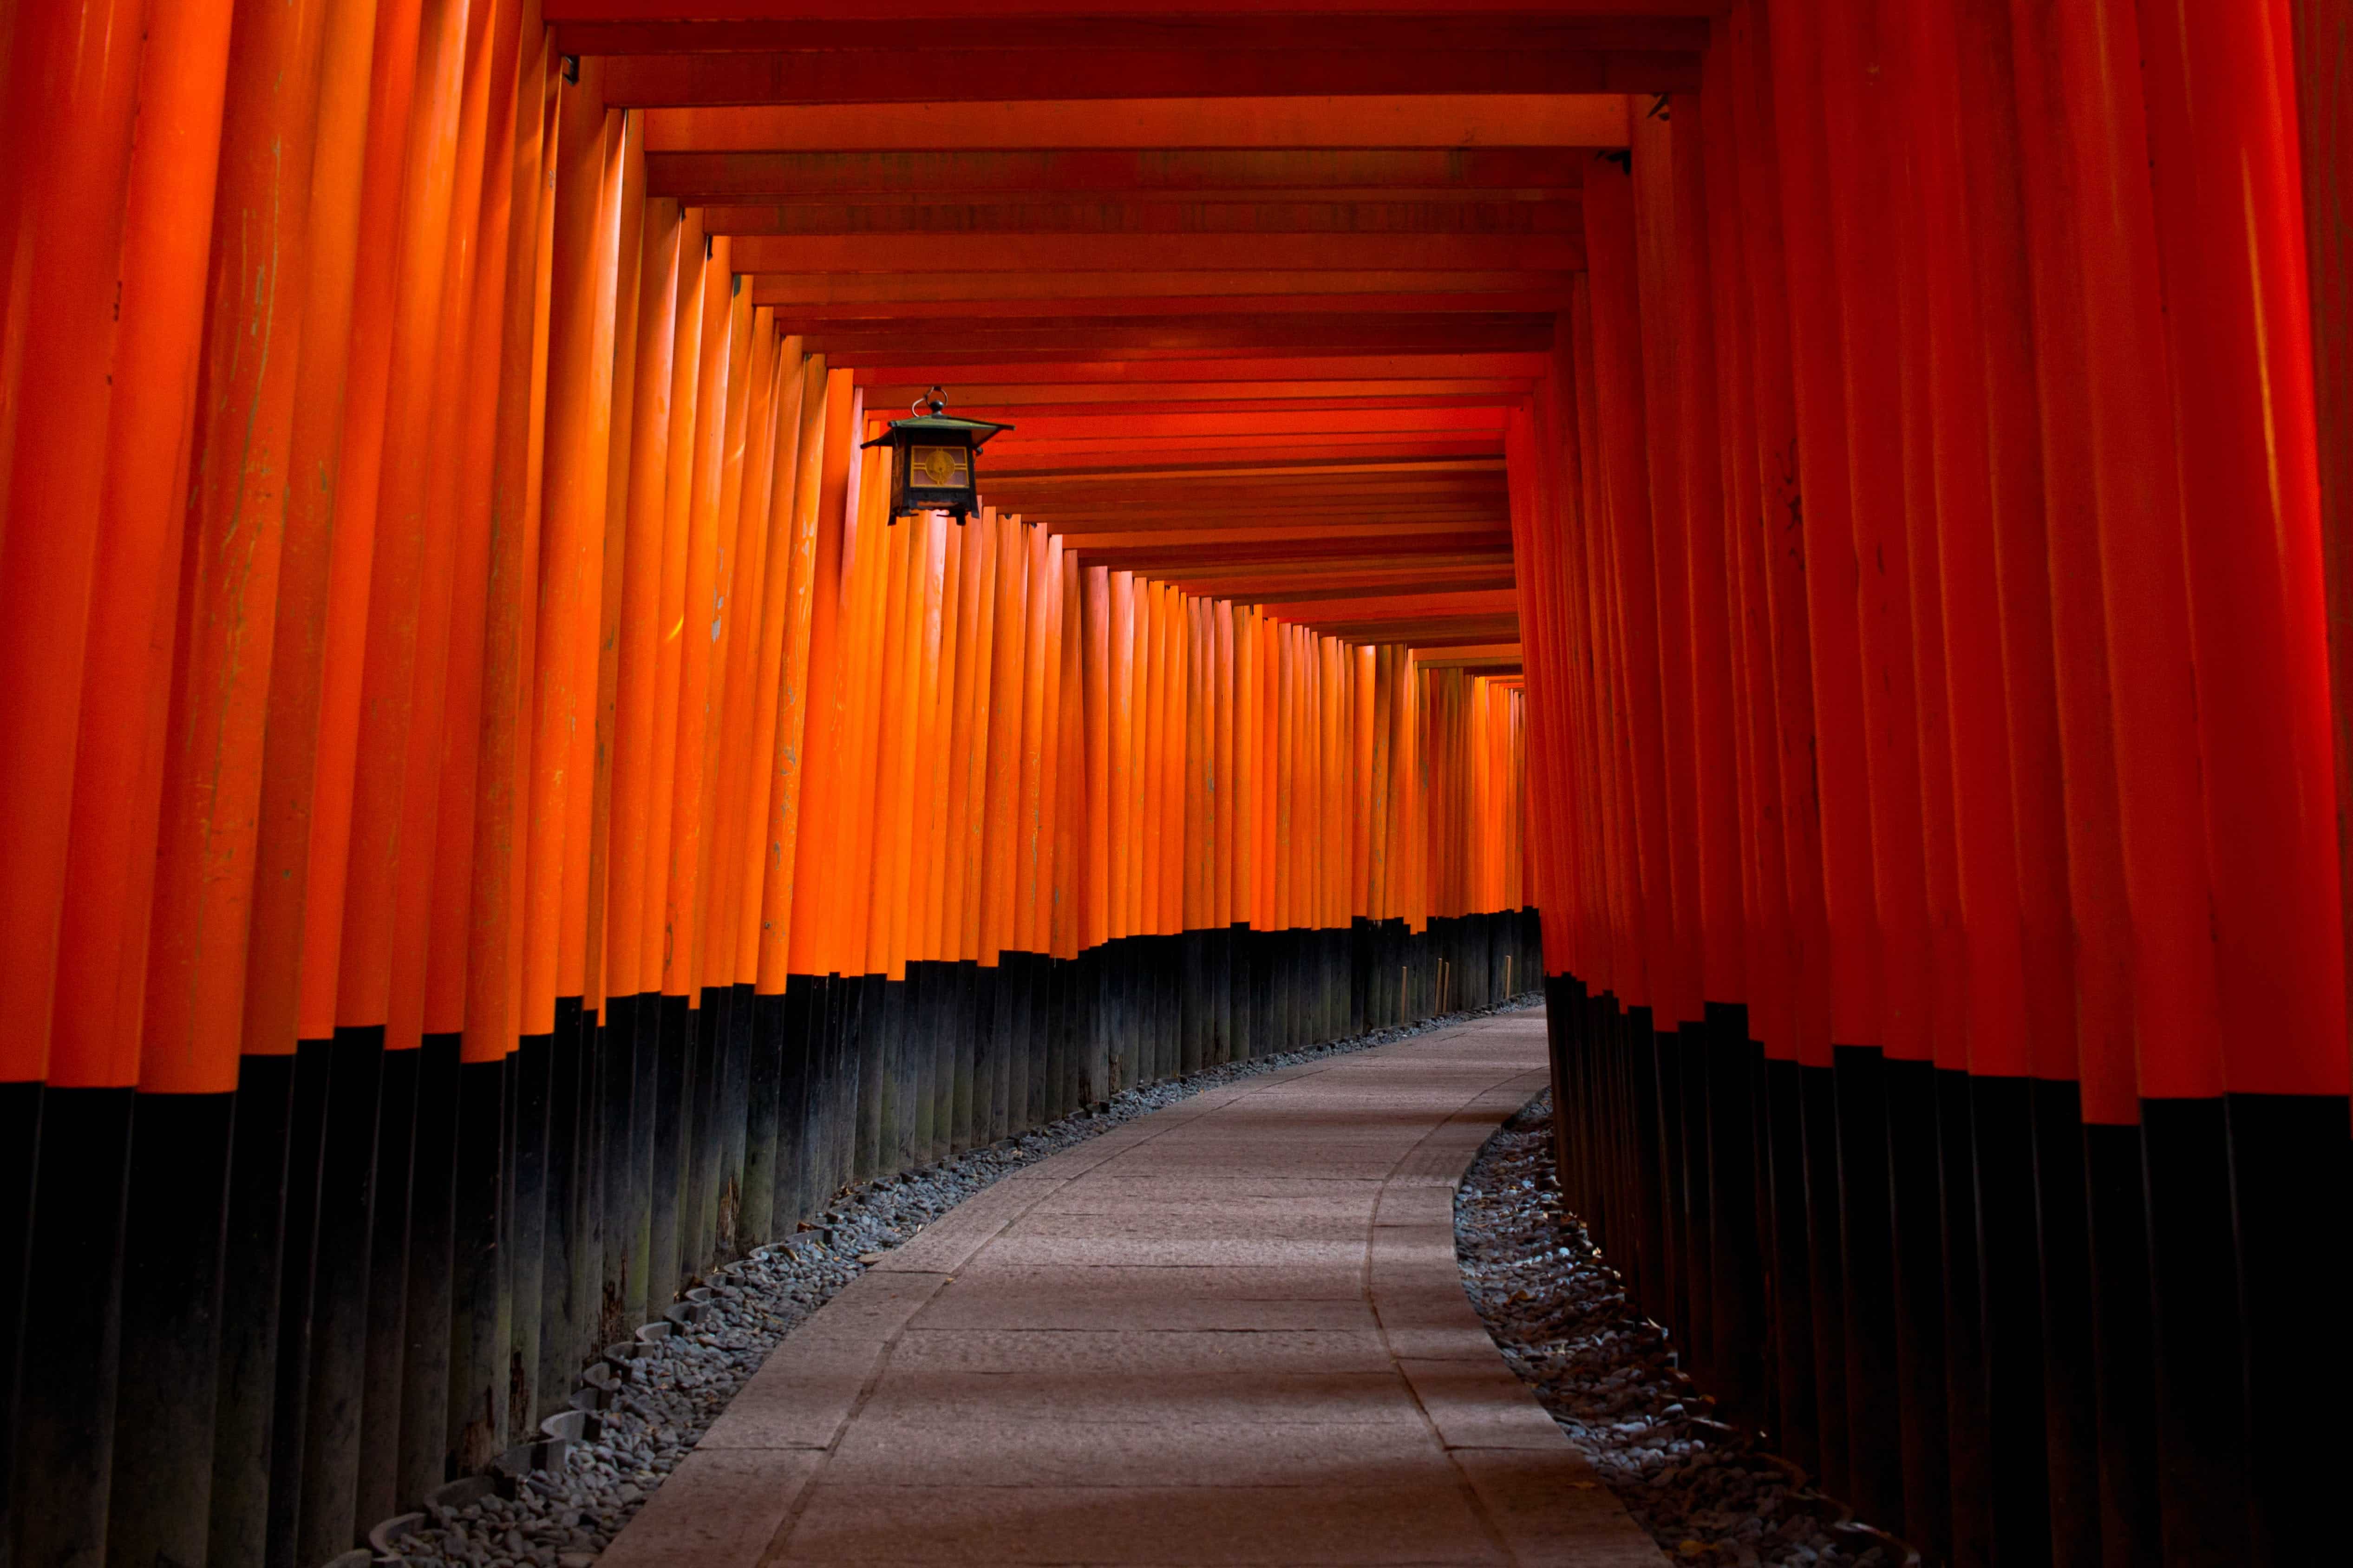 A series of bright orange gates leads up to a Japanese Buddhist temple